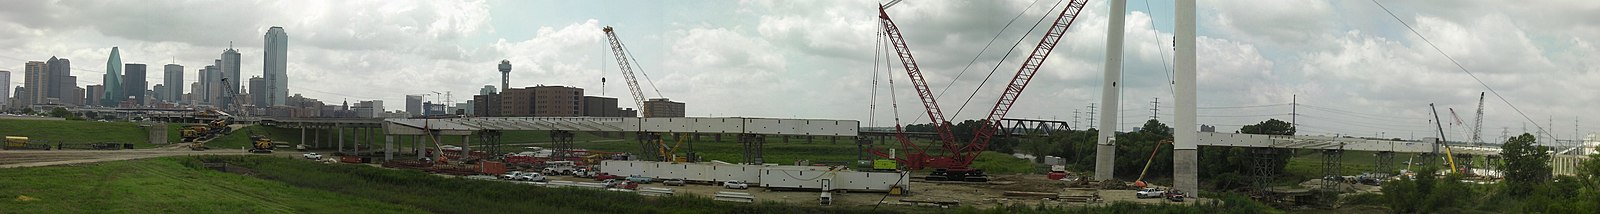 Construction in July 2010